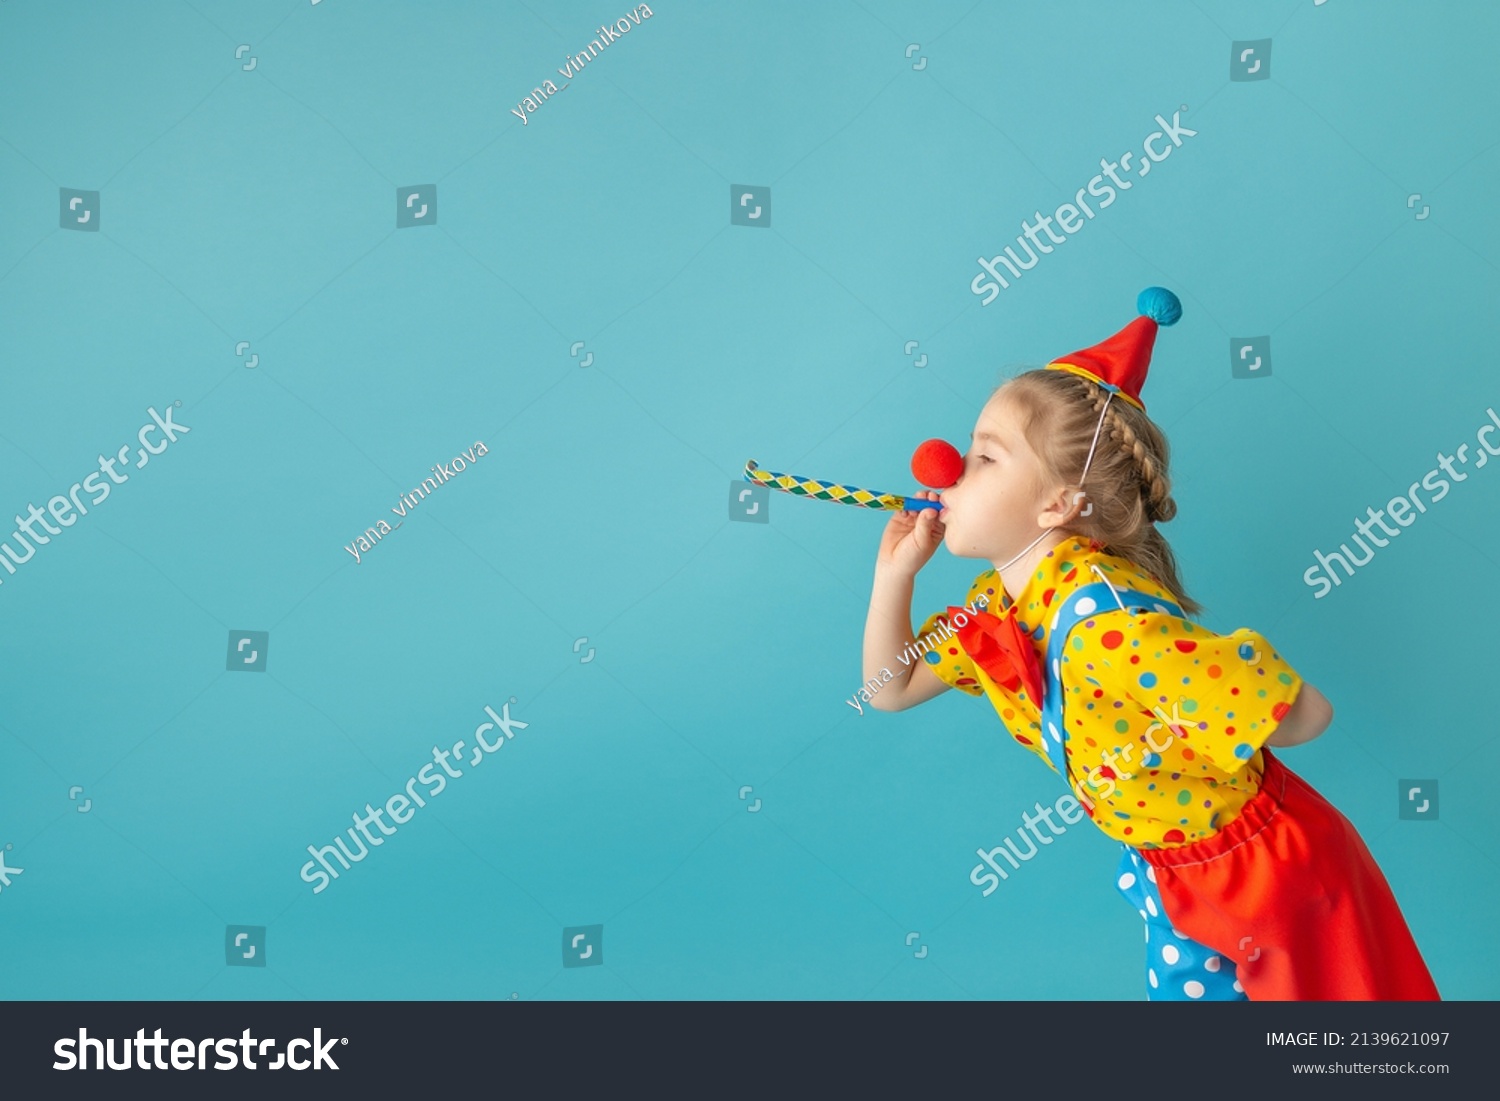 Funny kid clown against blue background. Happy child playing with festive decor. Birthday and 1 April Fool's day concept. #2139621097